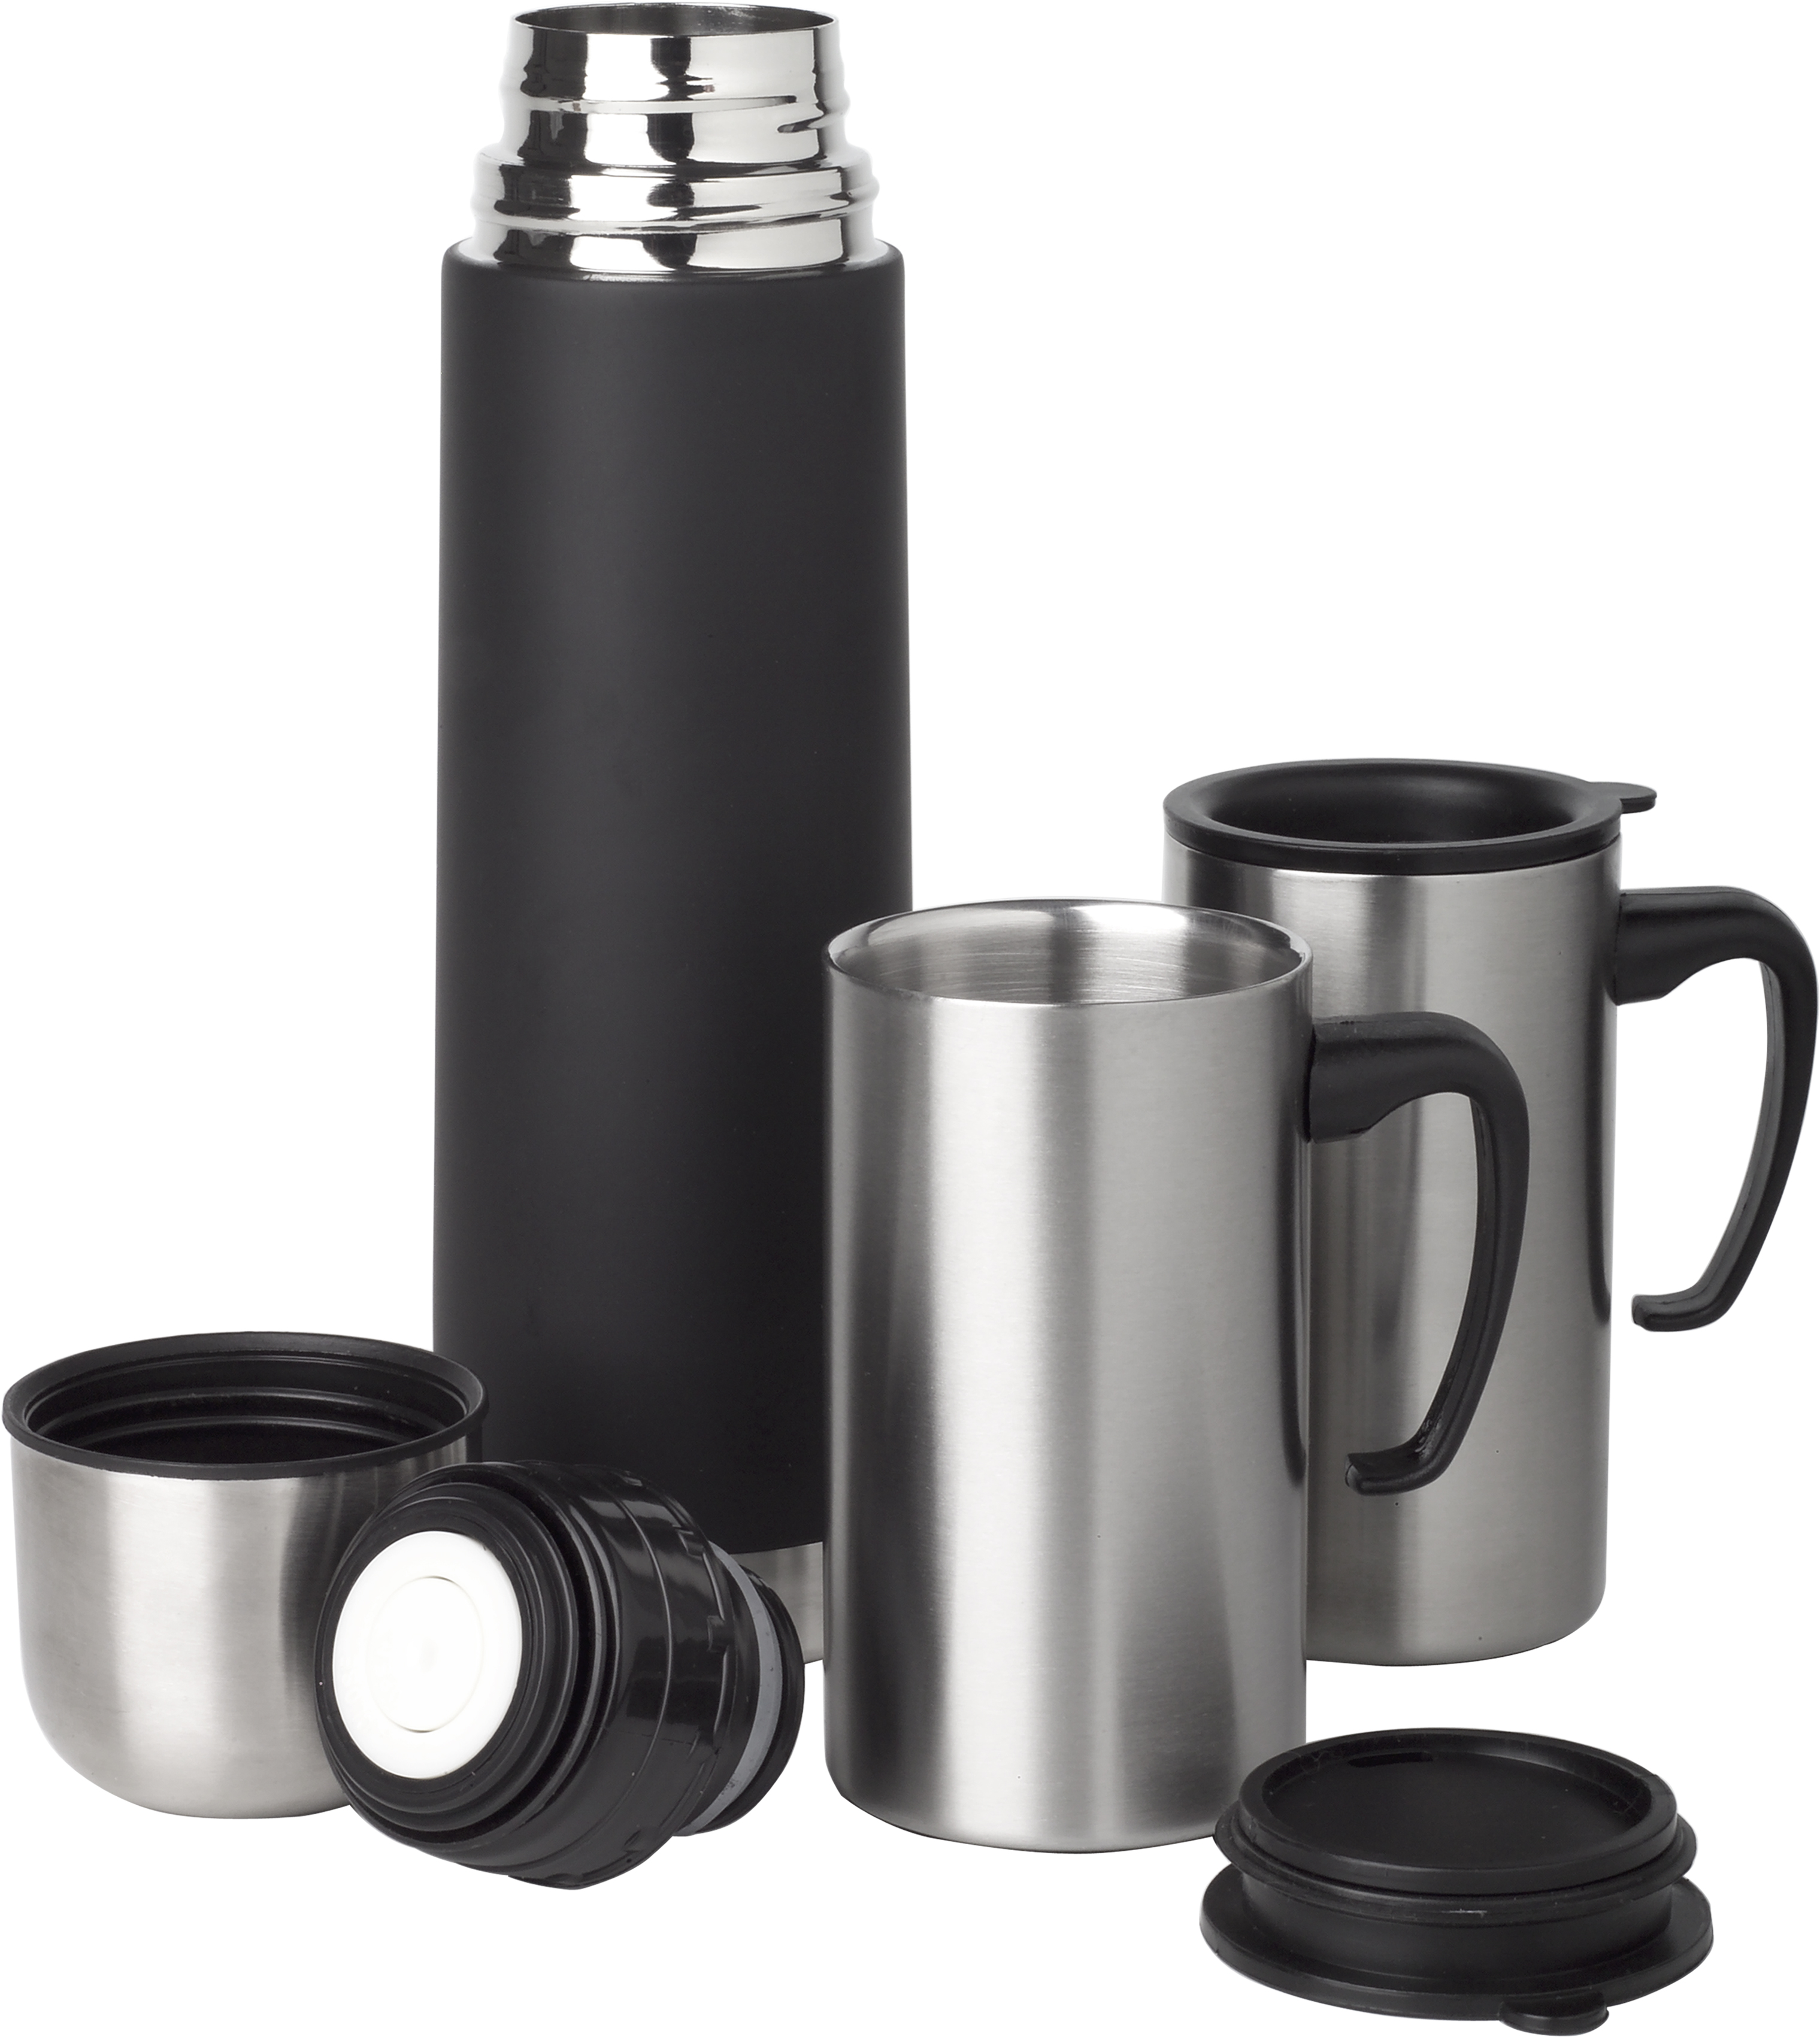 004678 009999999 3d090 ovr pro01 fal - Steel thermos set